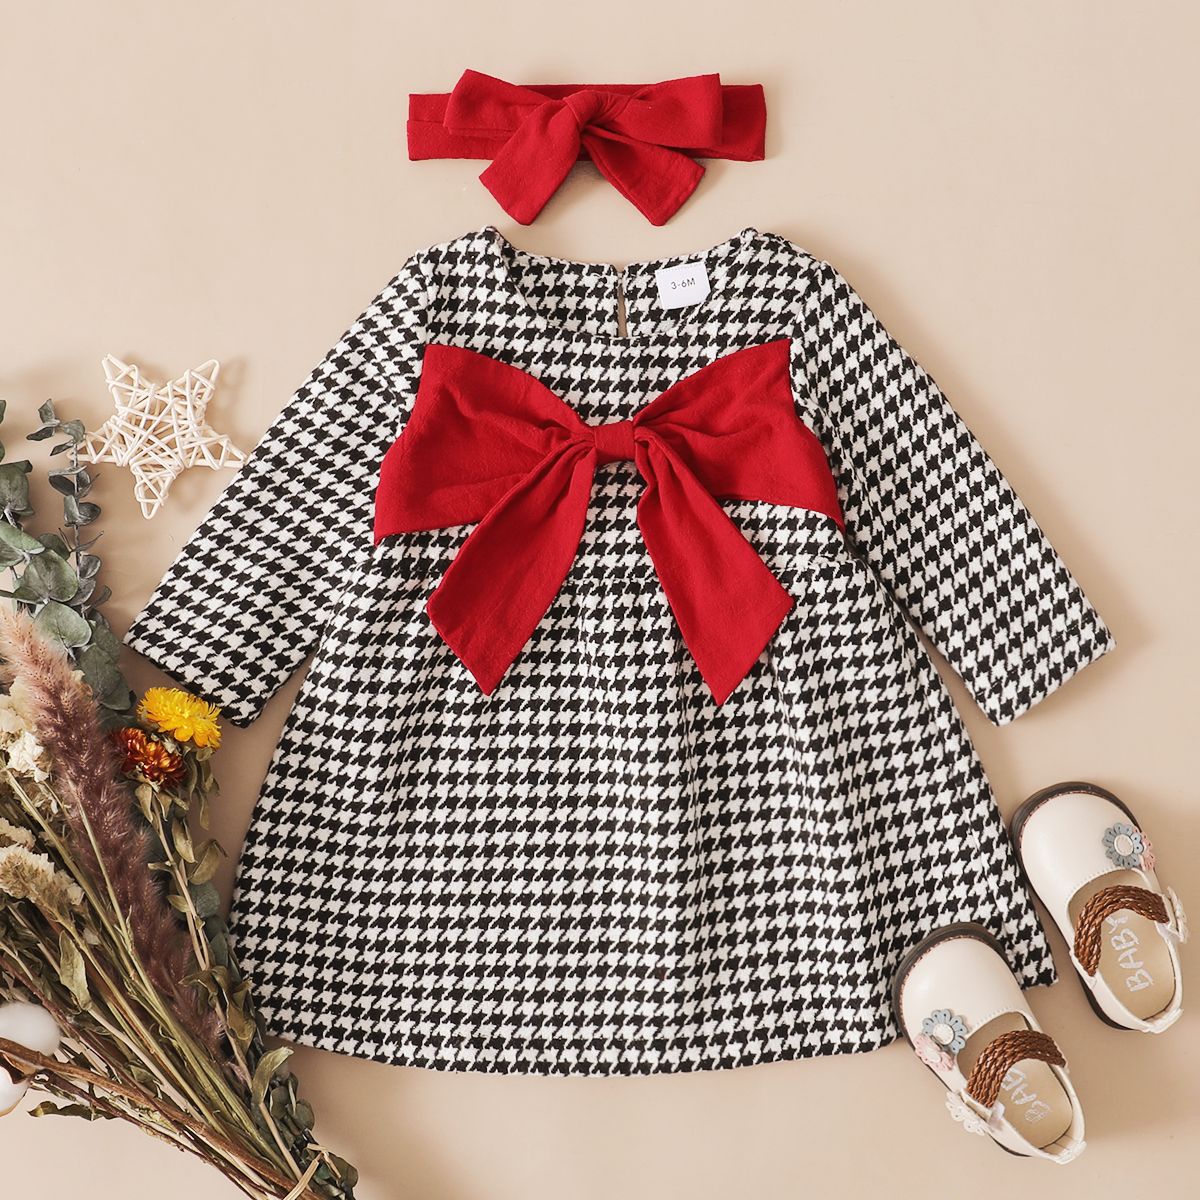 Baby 2pcs Cashmere Wool Houndstooth Plaid Long-sleeve Bowknot Dress